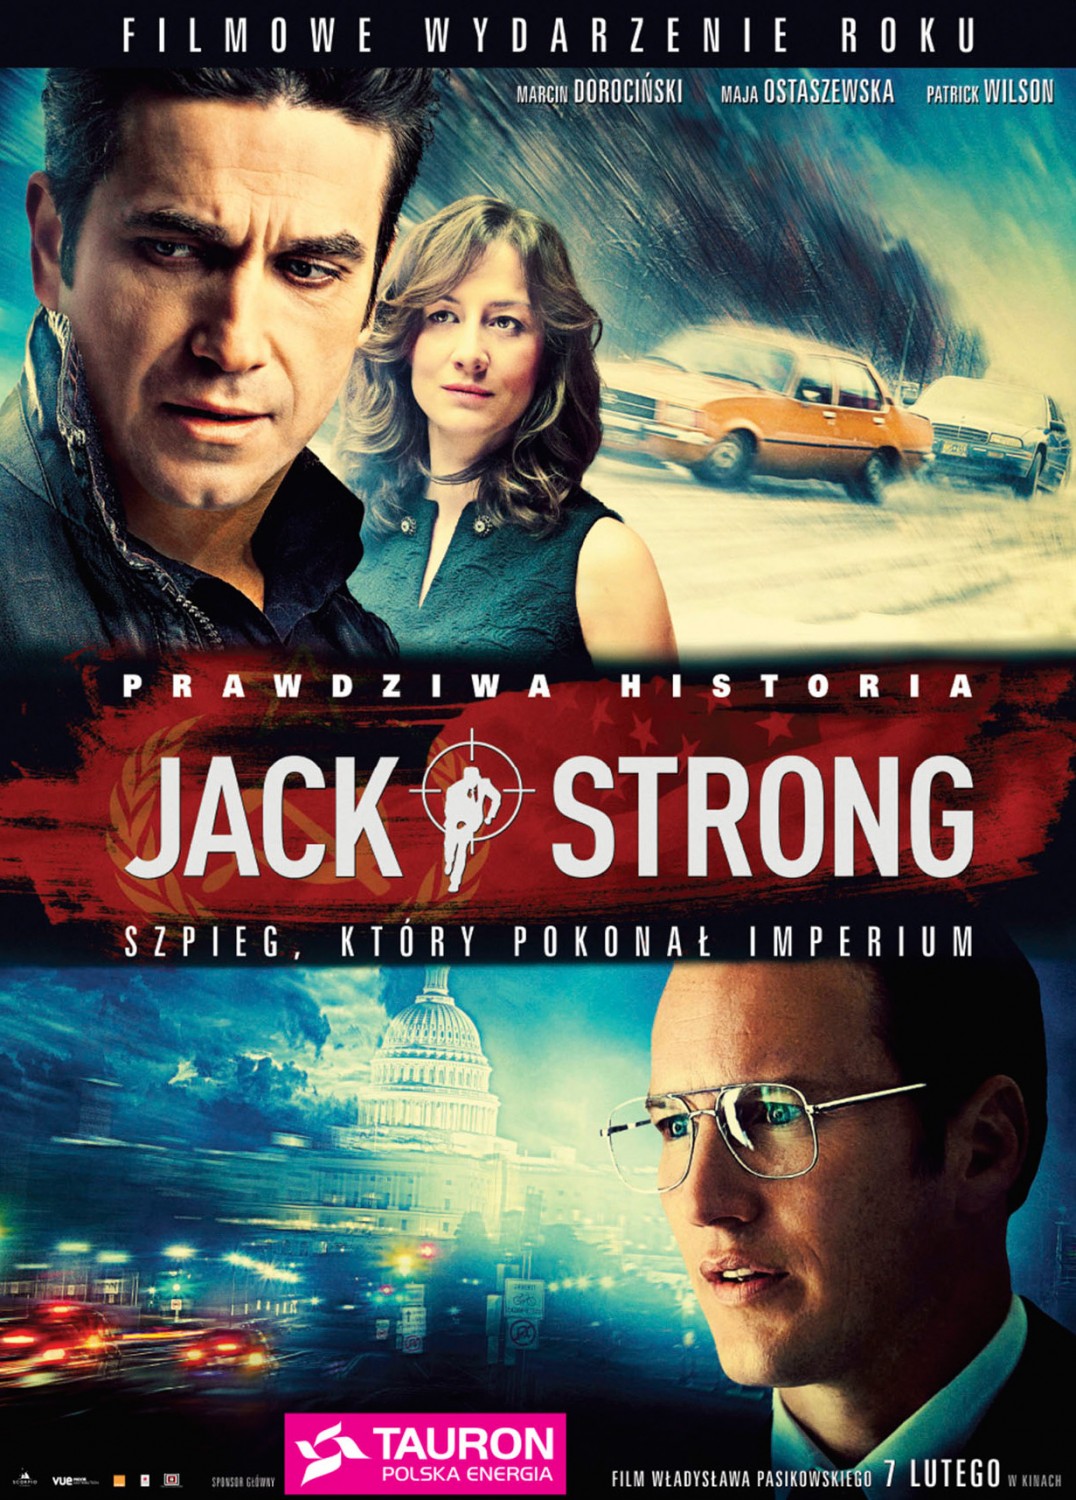 Extra Large Movie Poster Image for Jack Strong (#2 of 2)